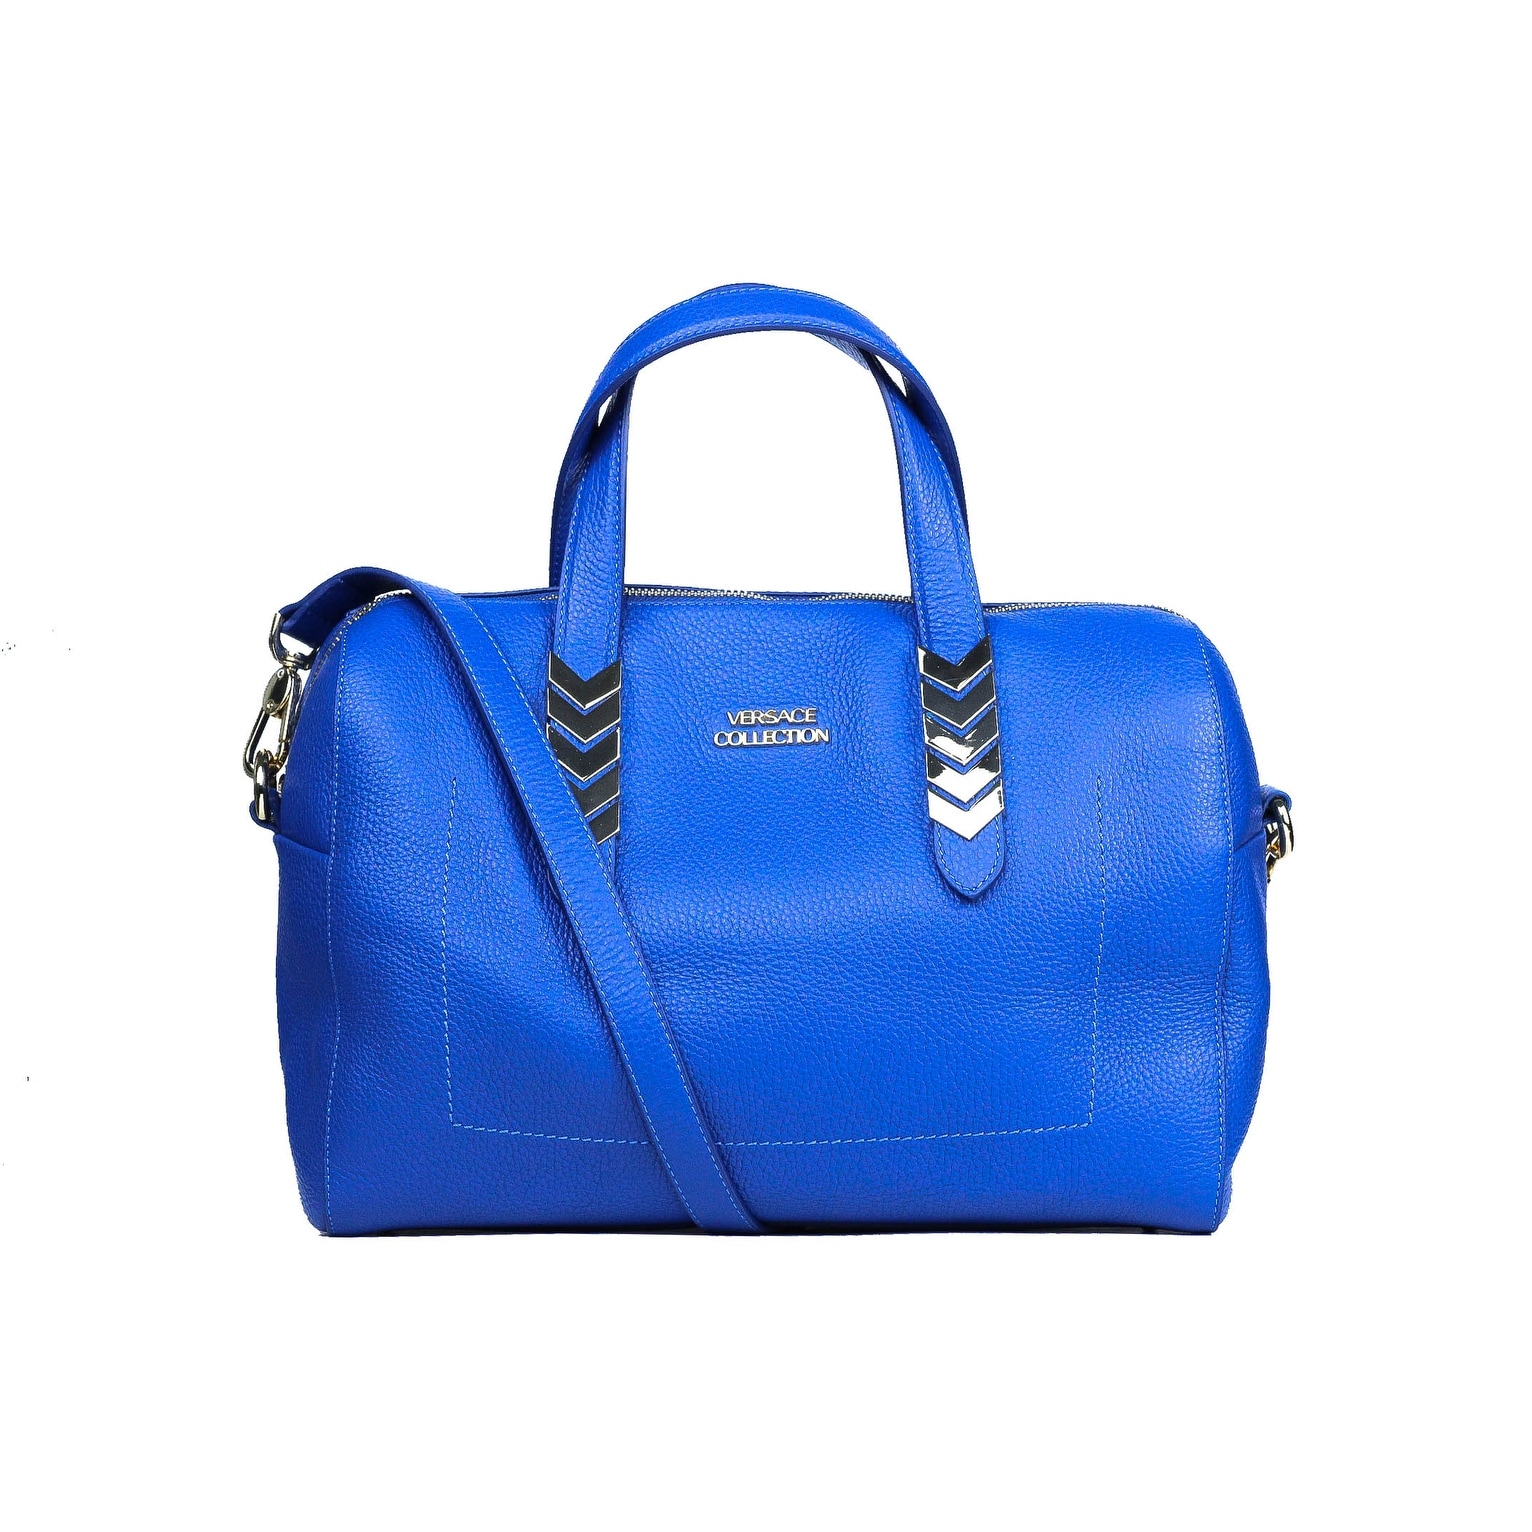 versace collection blue bag